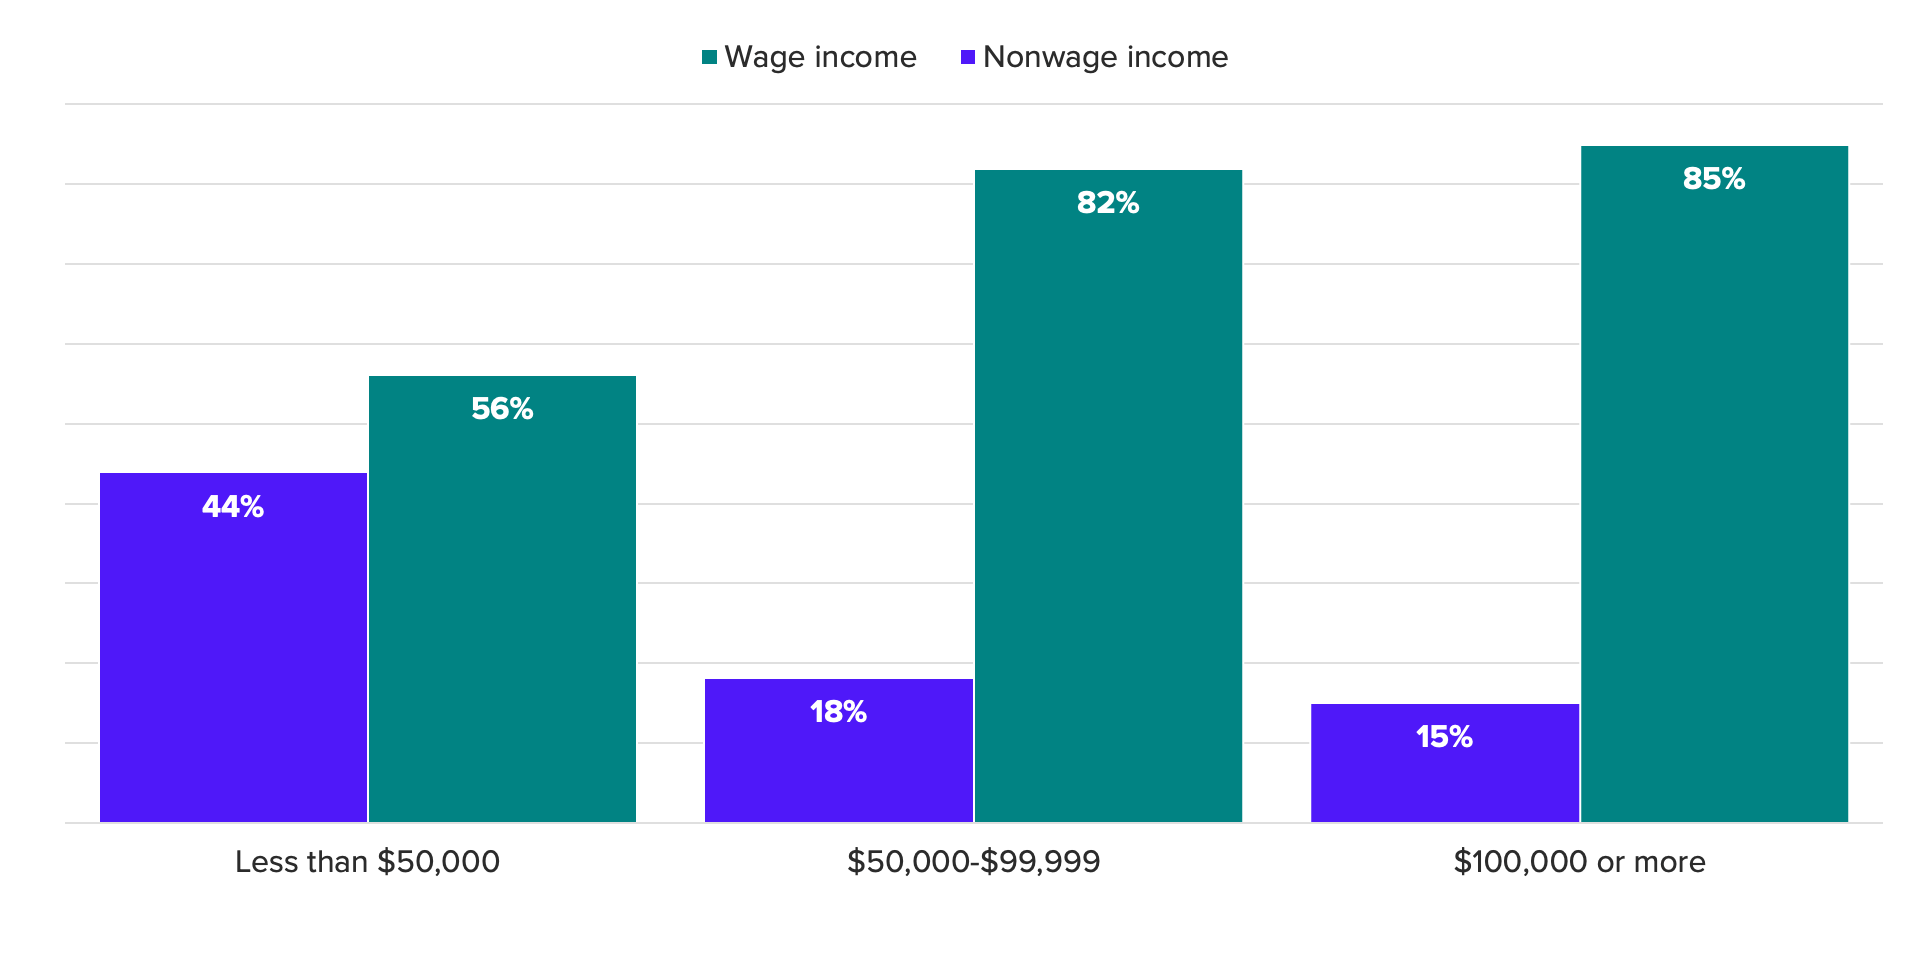 Bar charts showing monthly share of income sources (wage vs. nonwage) by income level